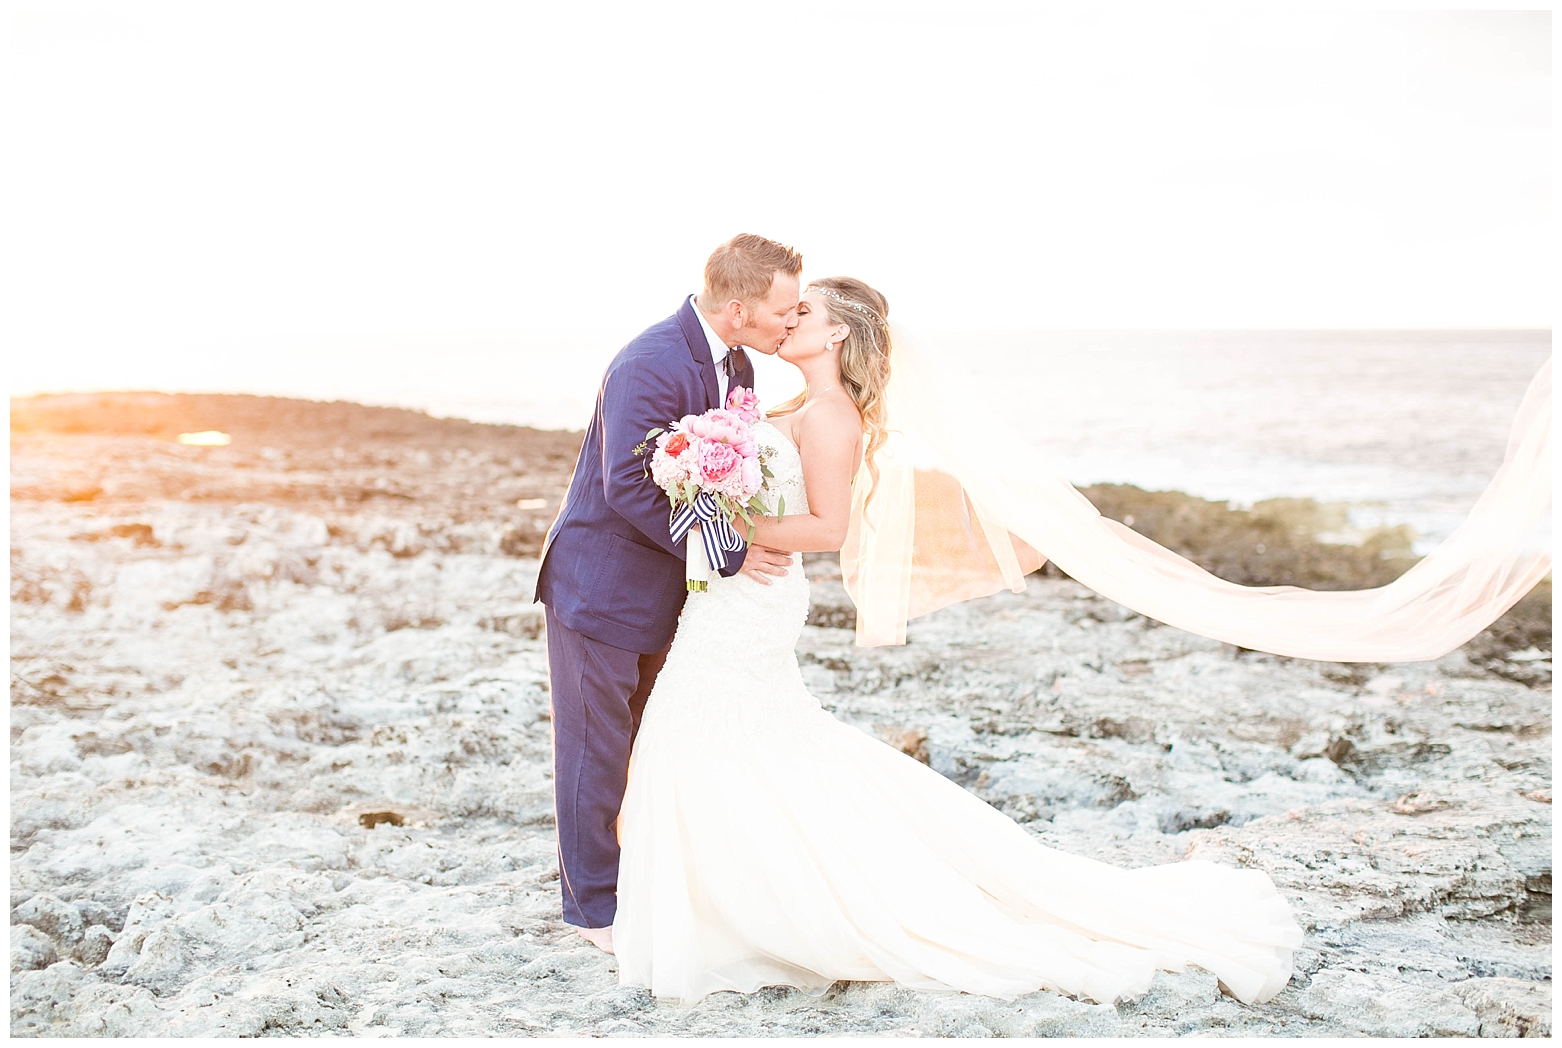 View More: http://hopetaylorphotographyphotos.pass.us/chelsey-and-marc-wedding